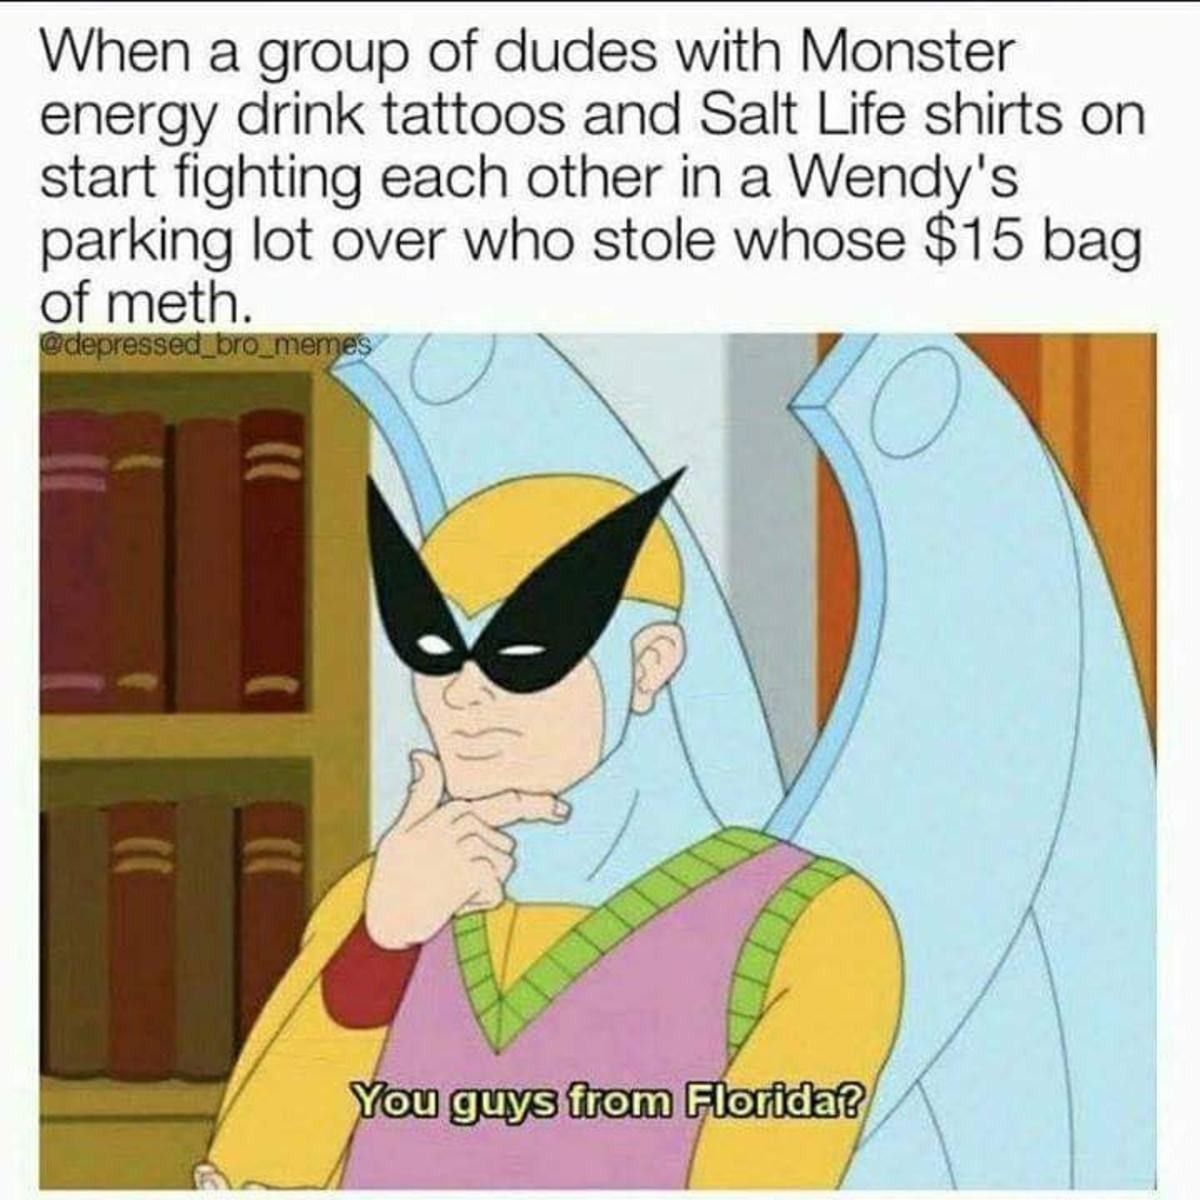 harvey birdman attorney at law quotes - When a group of dudes with Monster energy drink tattoos and Salt Life shirts on start fighting each other in a Wendy's parking lot over who stole whose $15 bag of meth. bro meme You guys from Florida